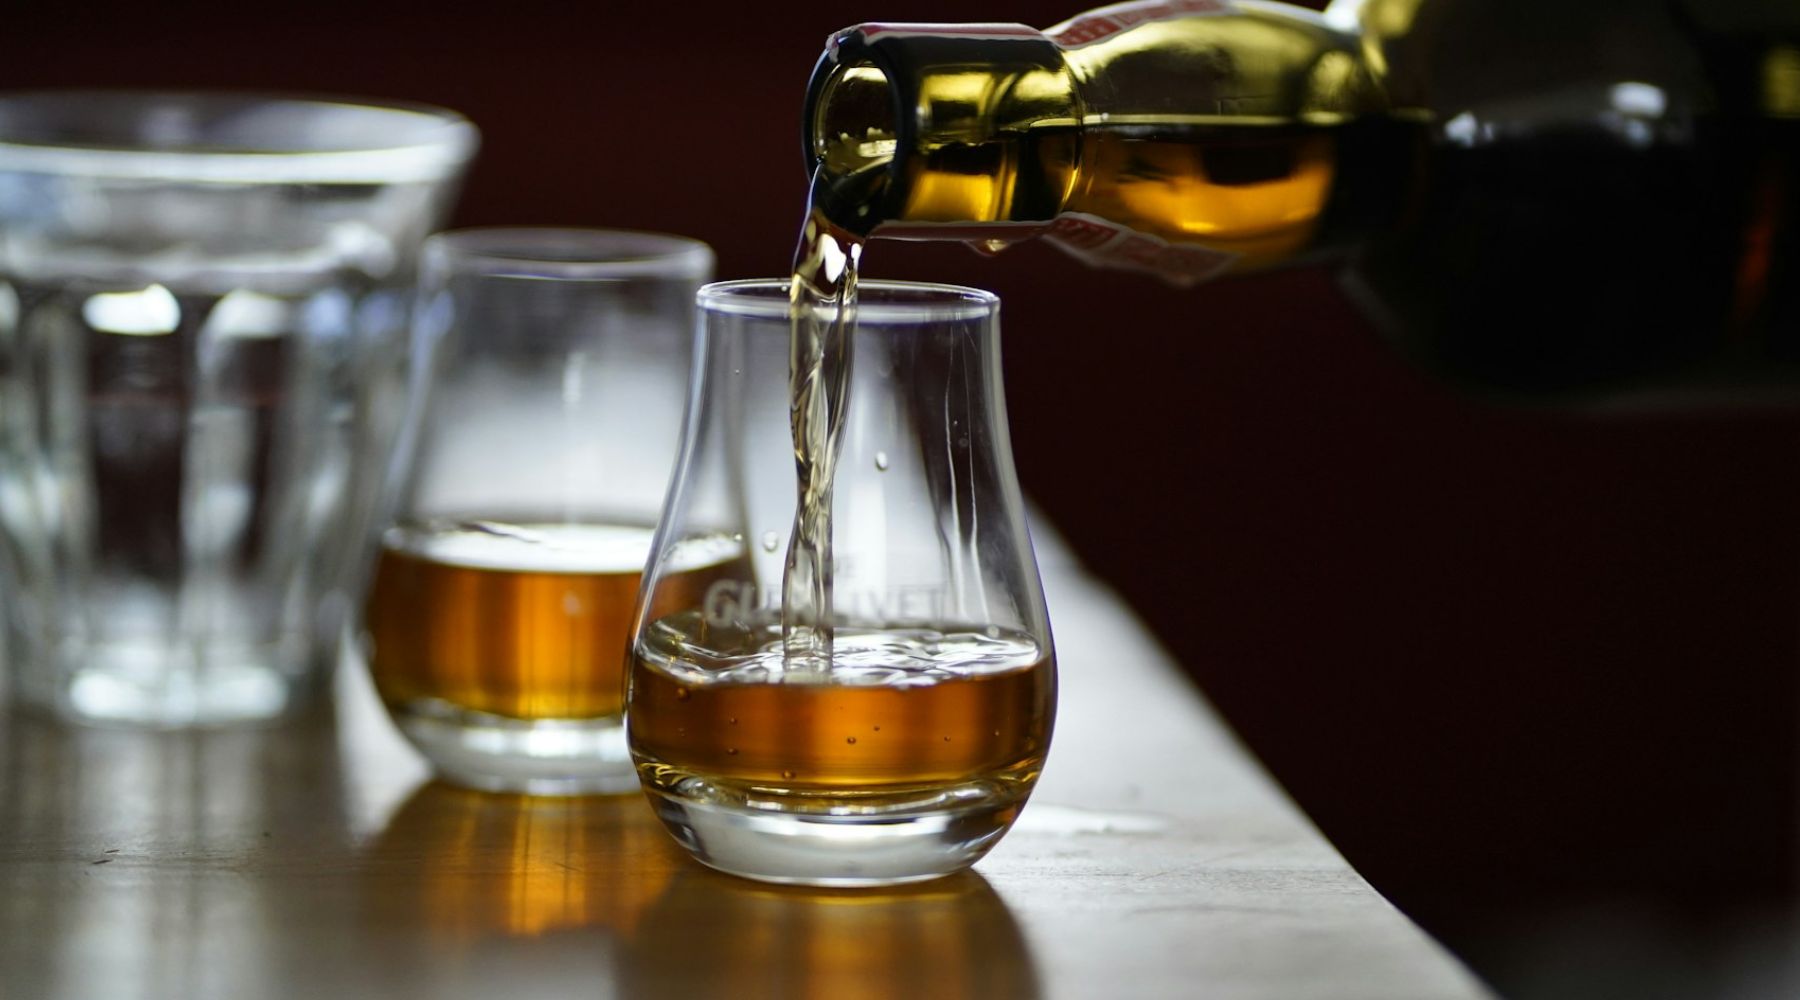 How to Drink Whisky? - AlbertWines2u